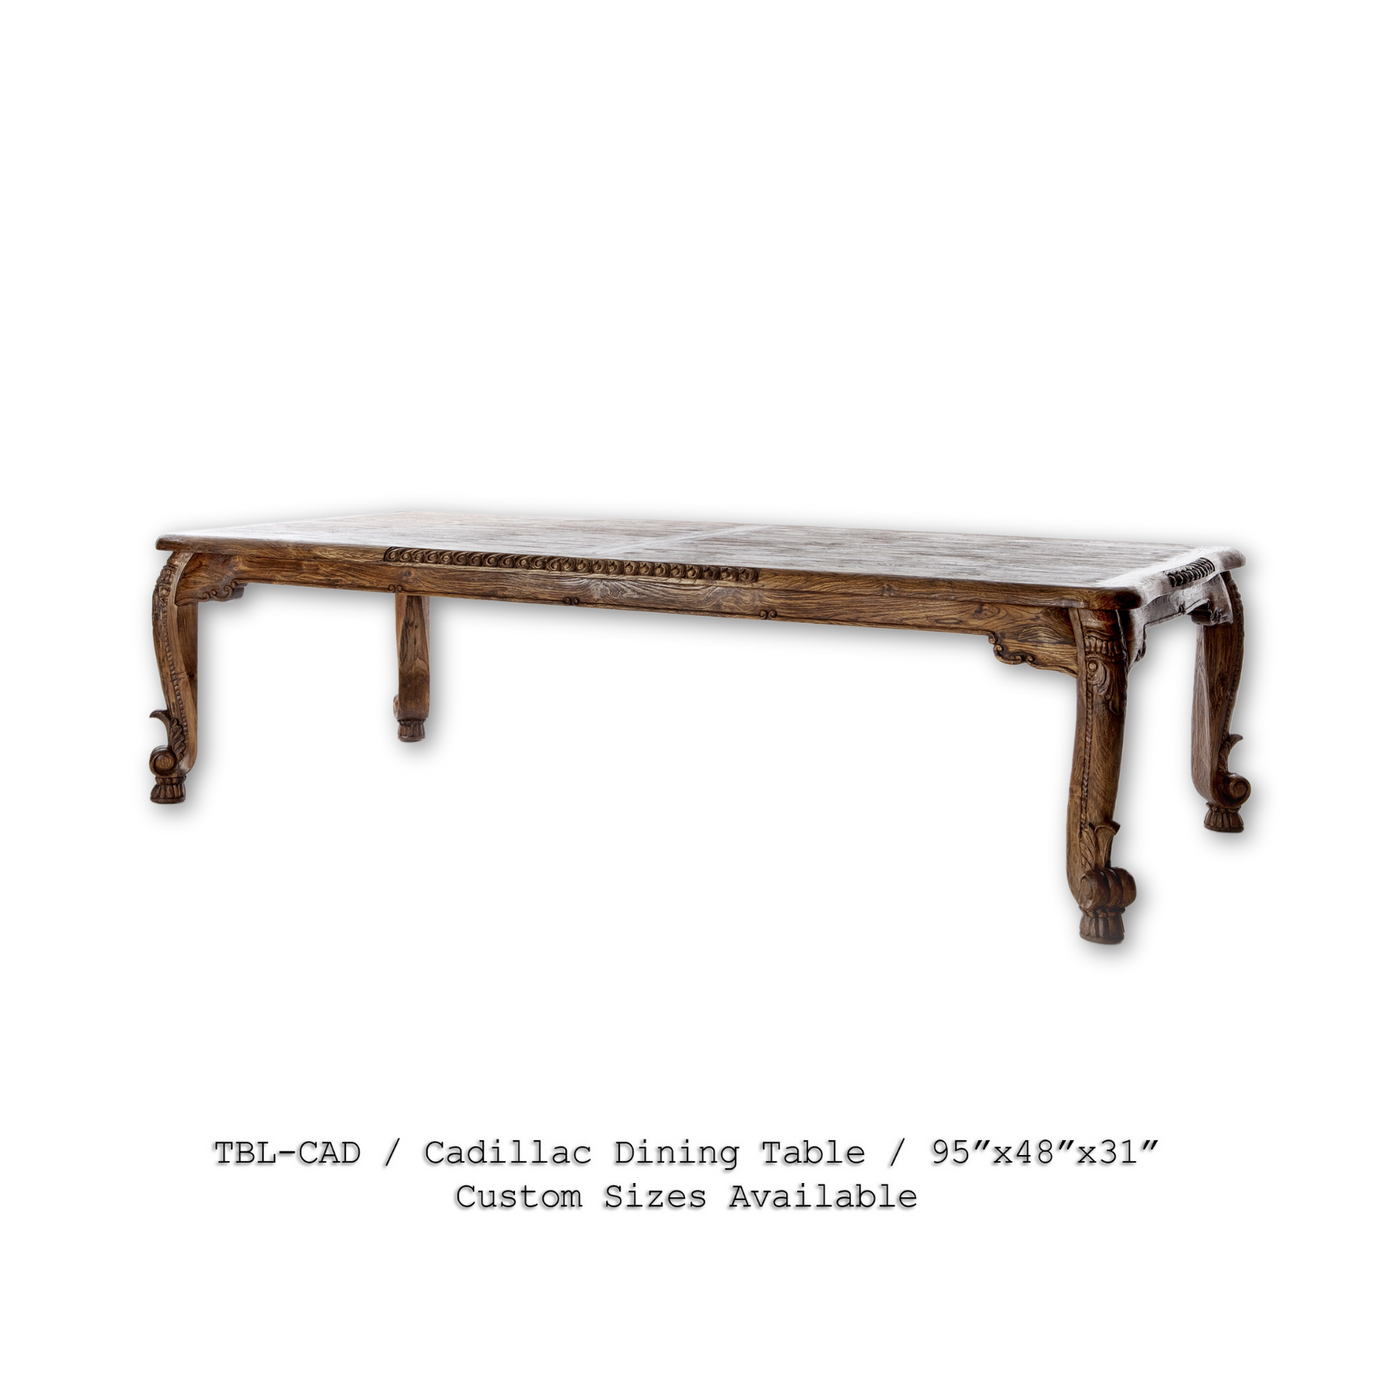 Cadillac Dining Table